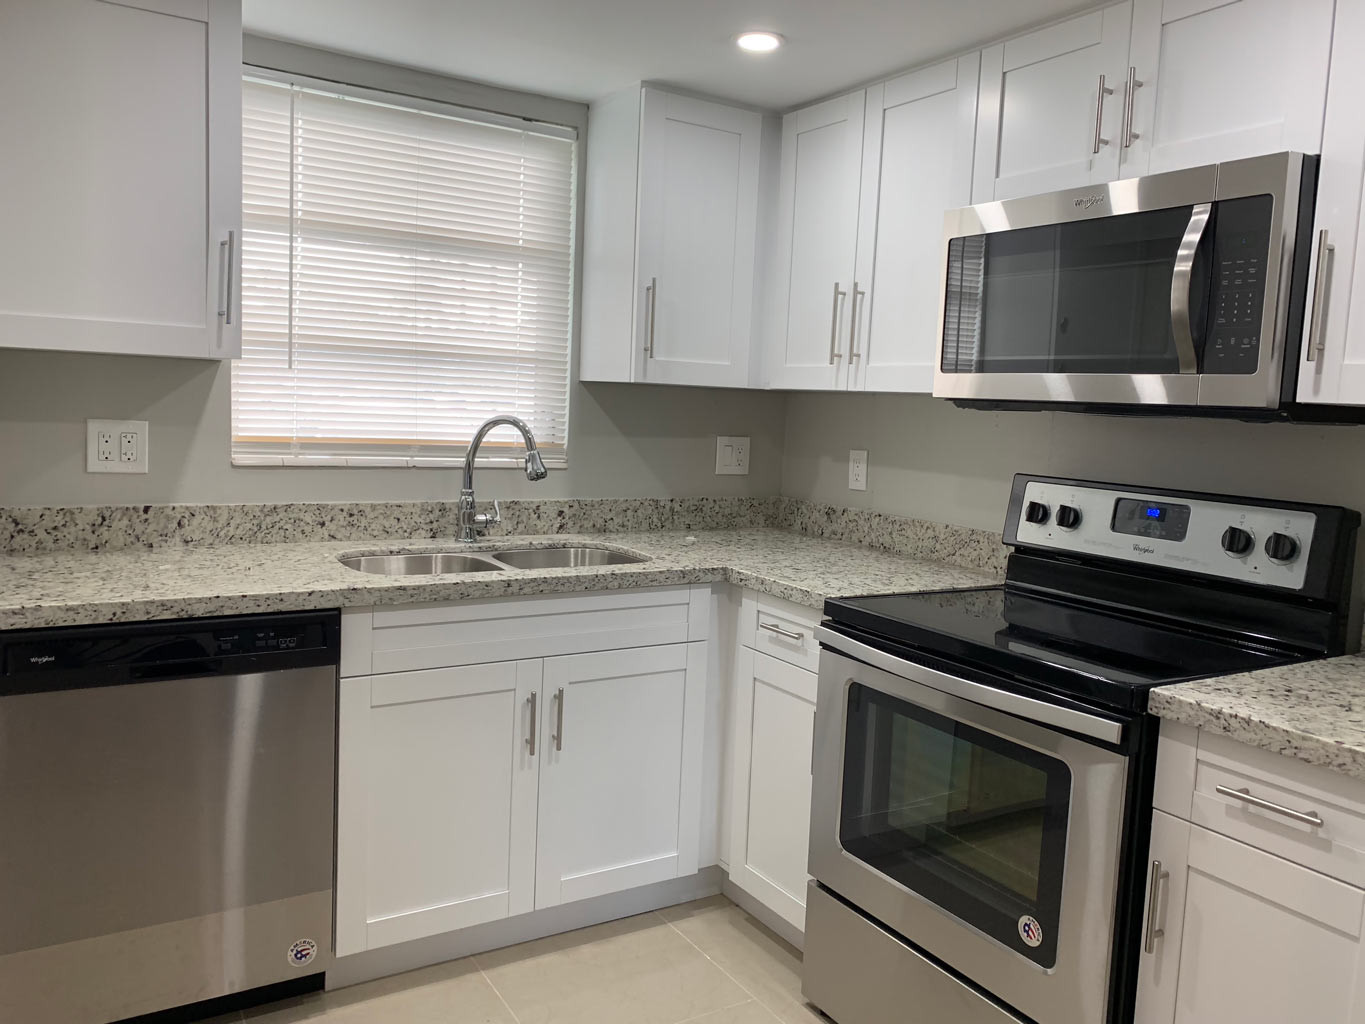 Kitchen Remodeling White Cabinets
 Small Kitchen Remodel with White Shaker Cabinets — Miami